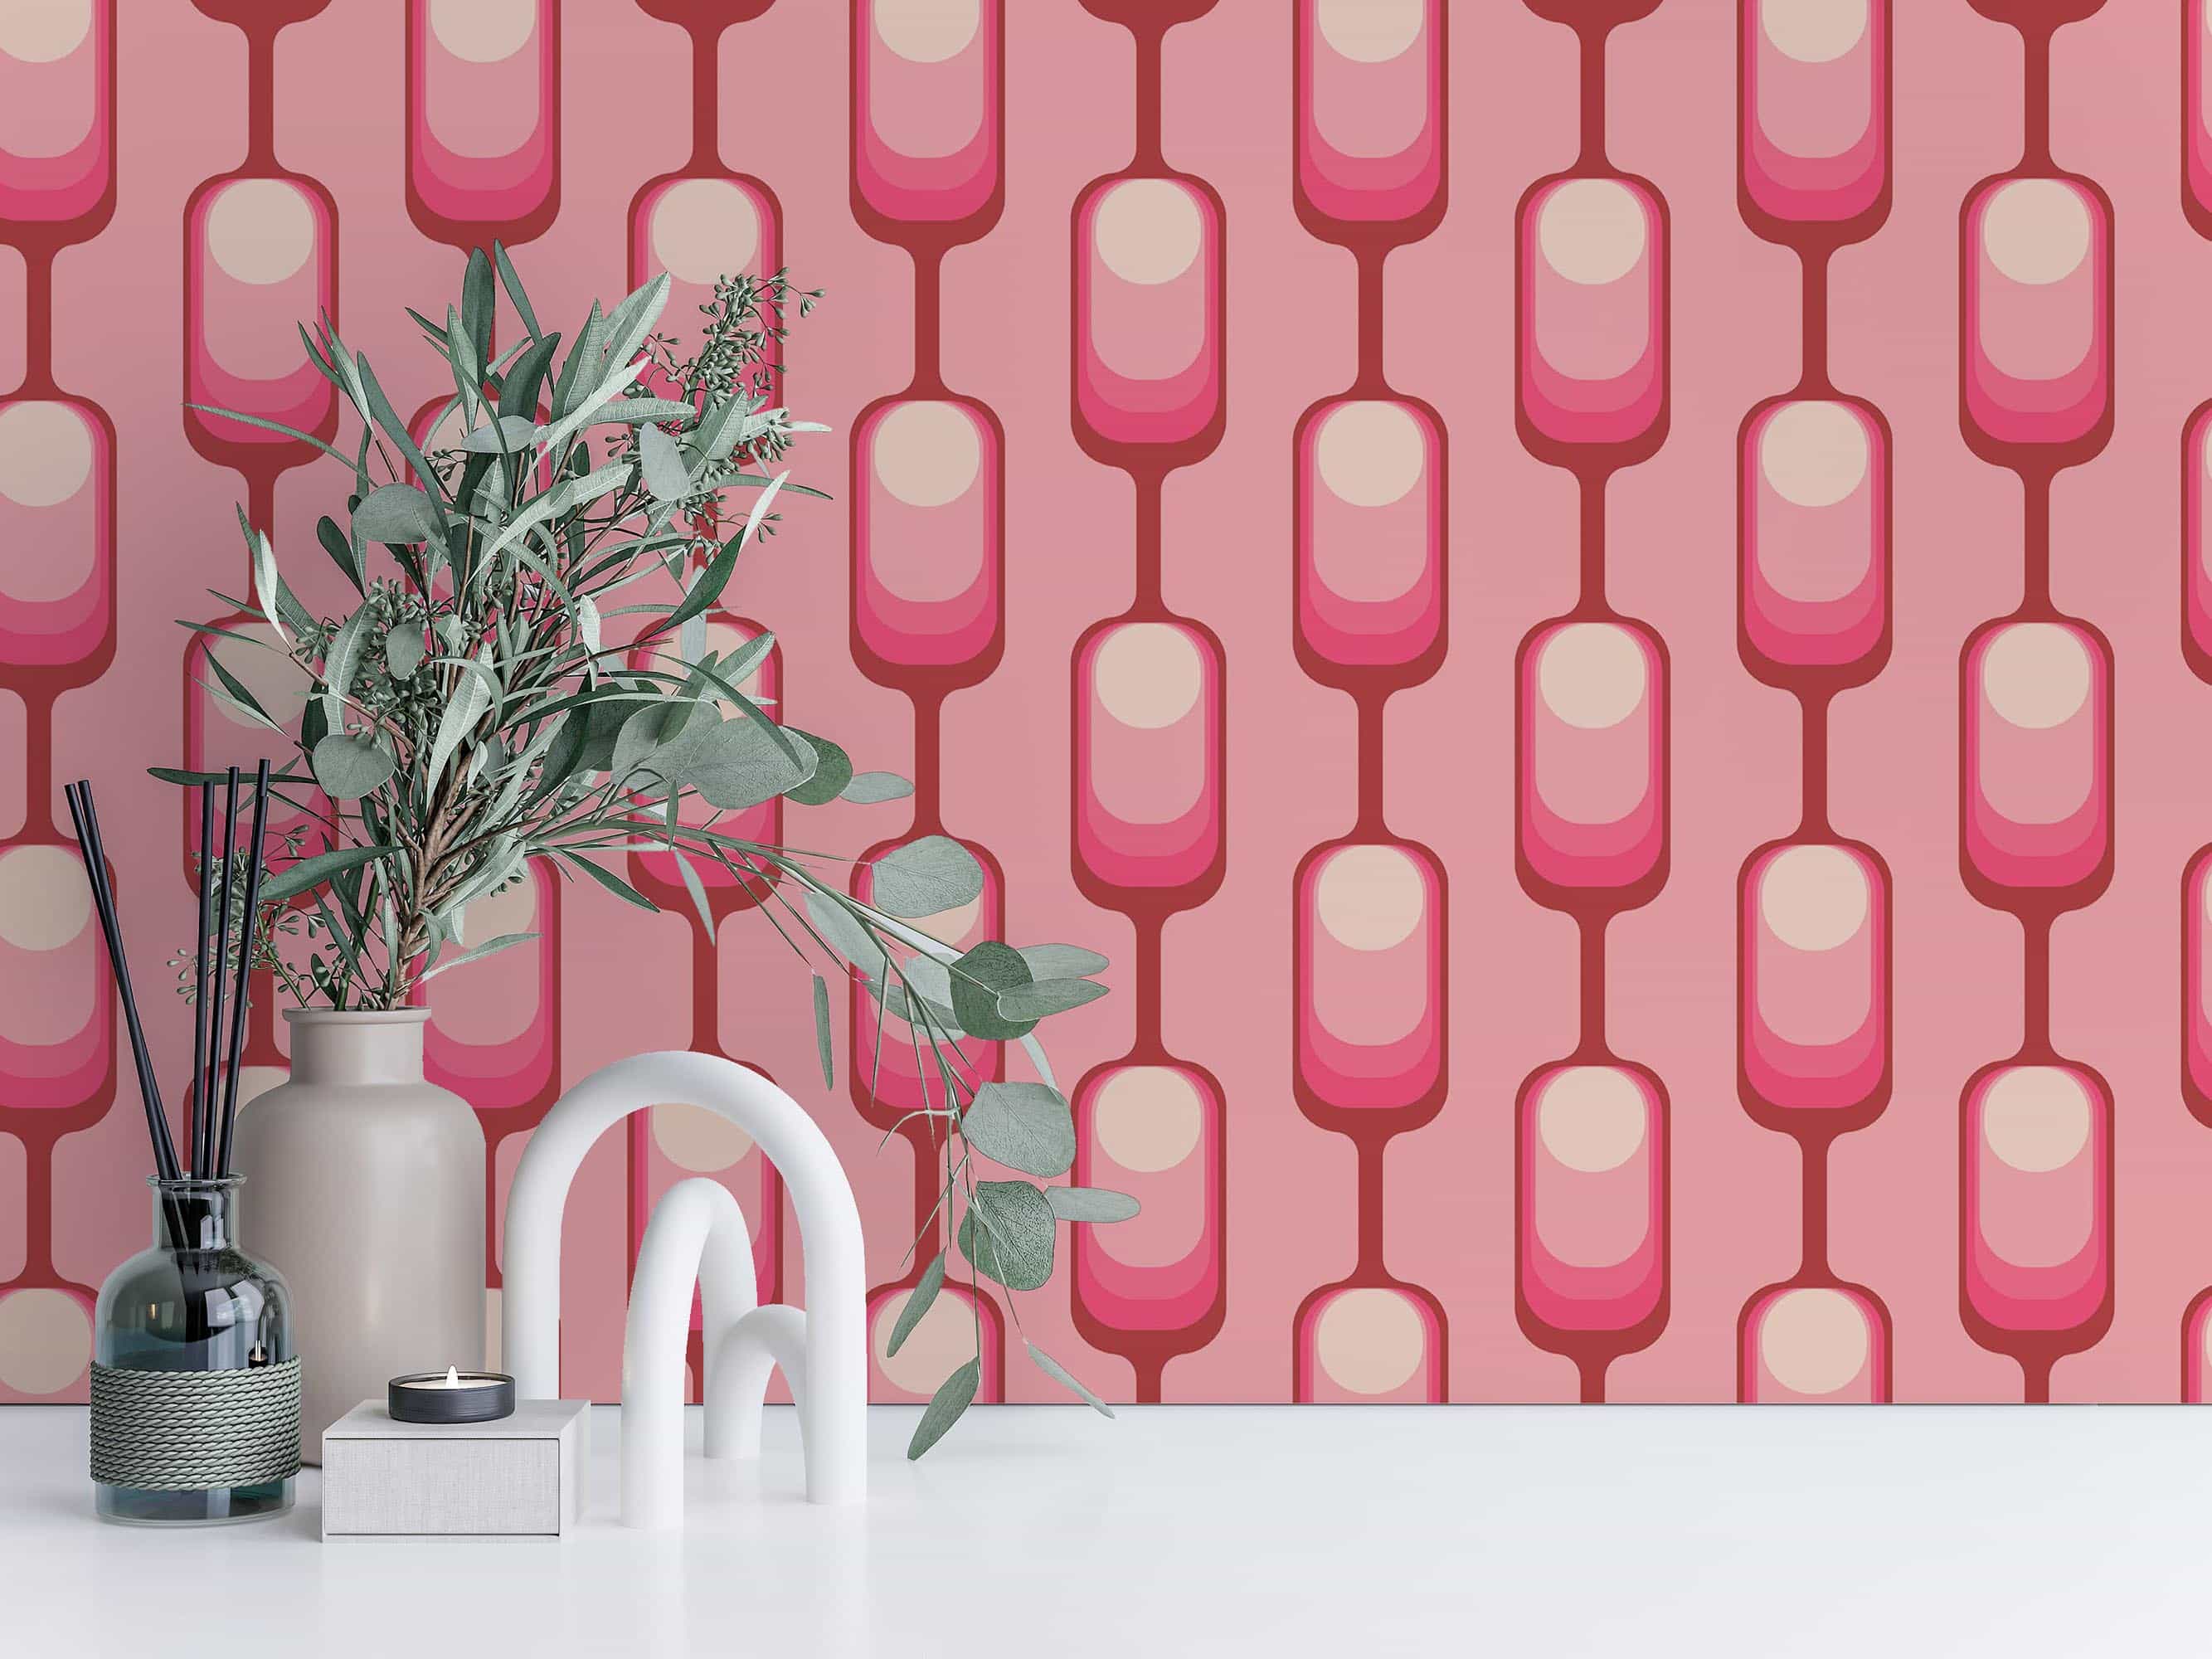 Pink retro wallpaper - Peel and Stick or Non-Pasted